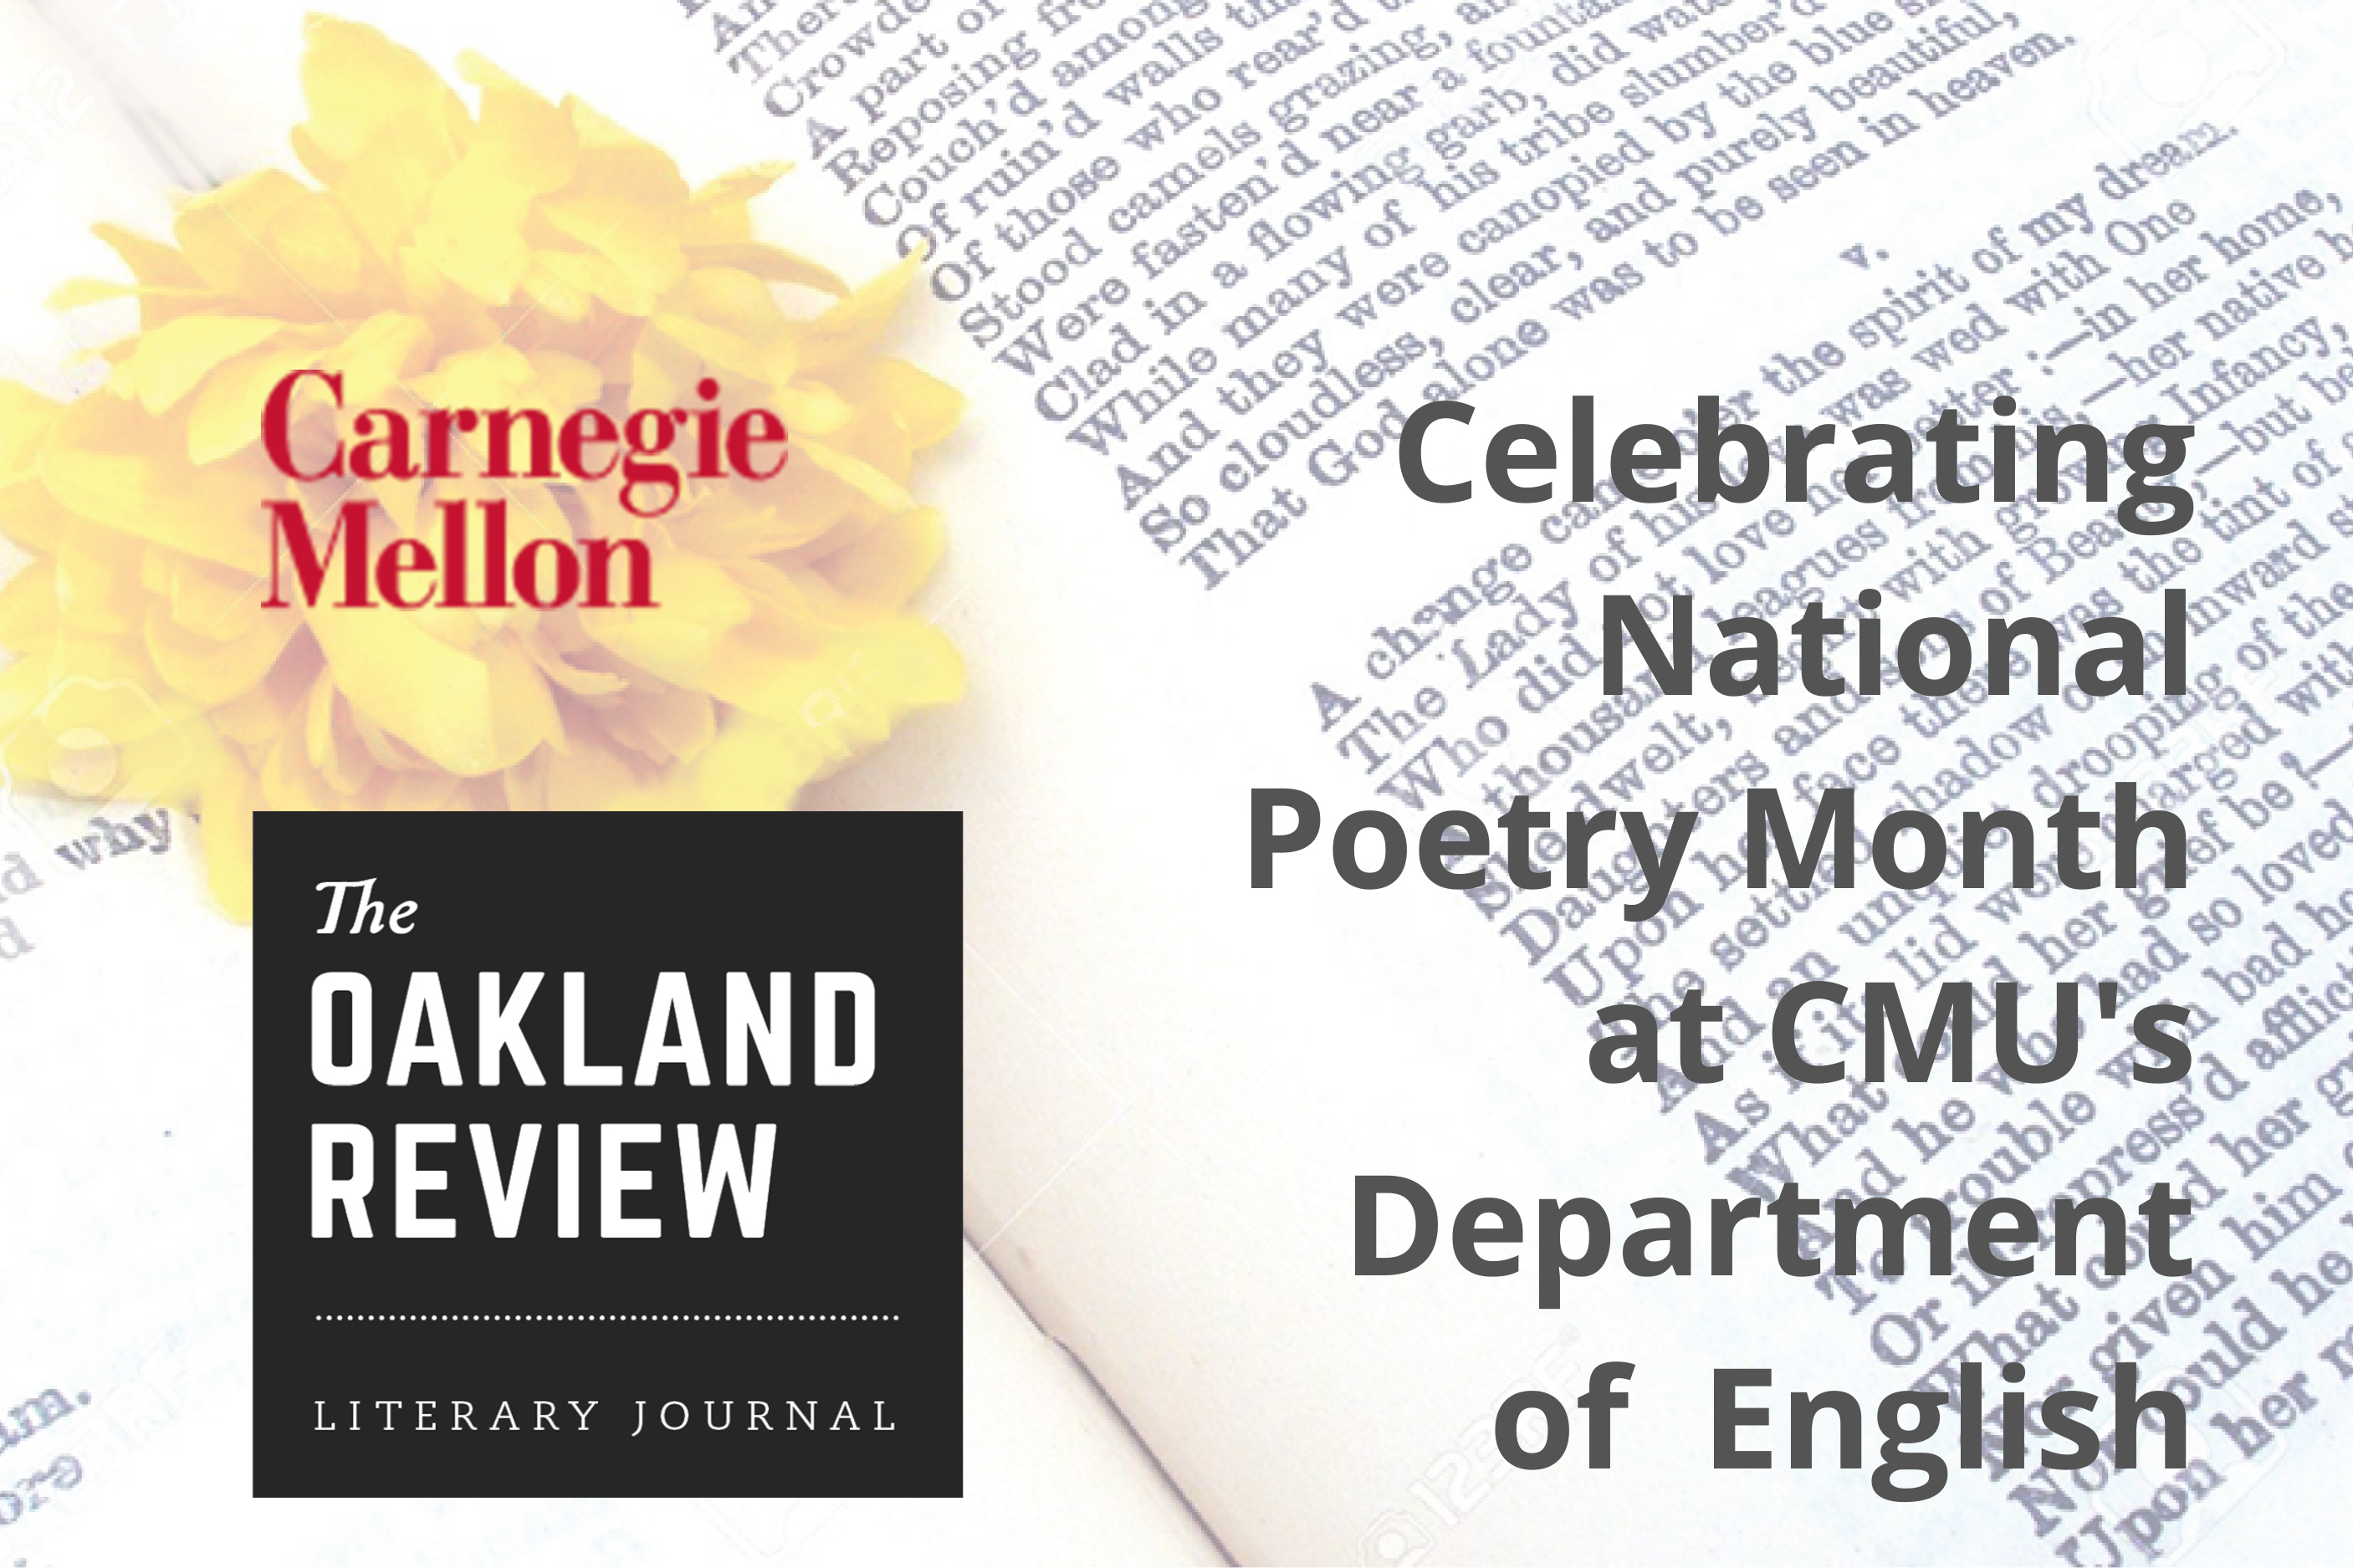 Logos for Carnegie Mellon University Press and The Oakland Review.